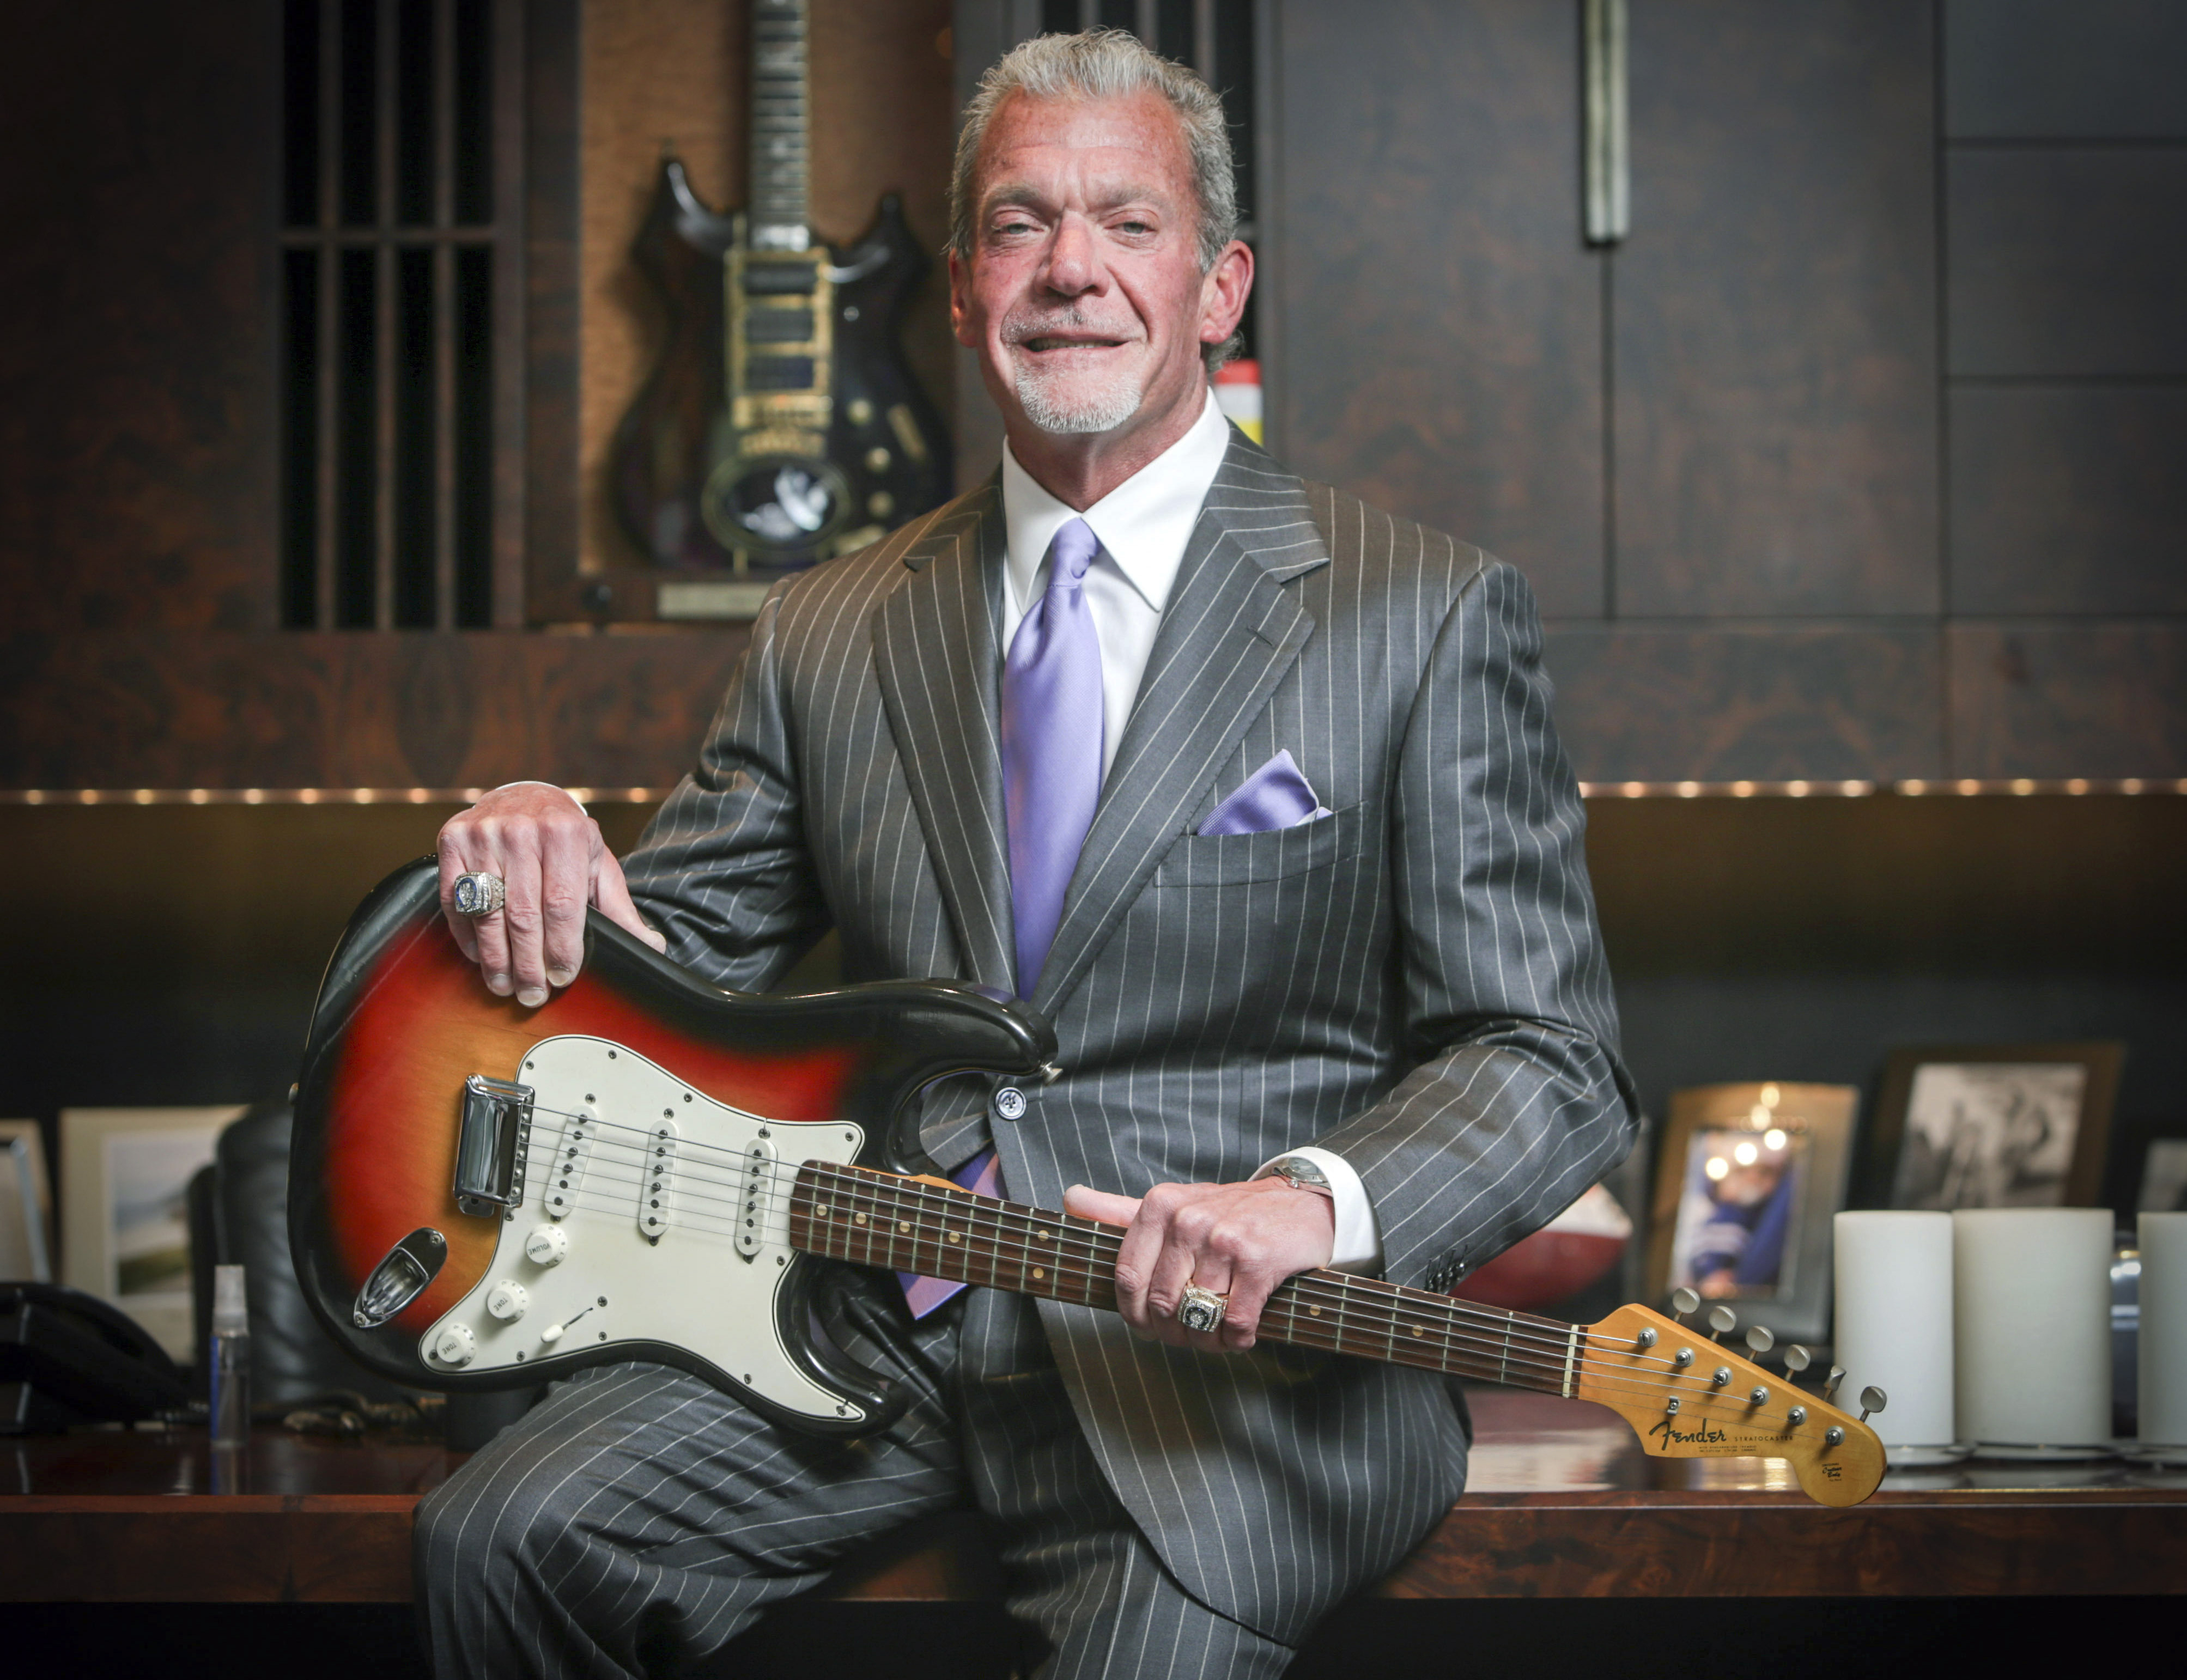 Indianapolis Colts owner and CEO Jim Irsay with the Fender Stratocaster guitar that Bob Dylan played at the Newport Folk Festival in 1965. Irsay is talking with officials in several cities about the possibility of creating a museum to display the pop culture memorabilia that he’s spent millions of dollars collecting over the past 20 years. 